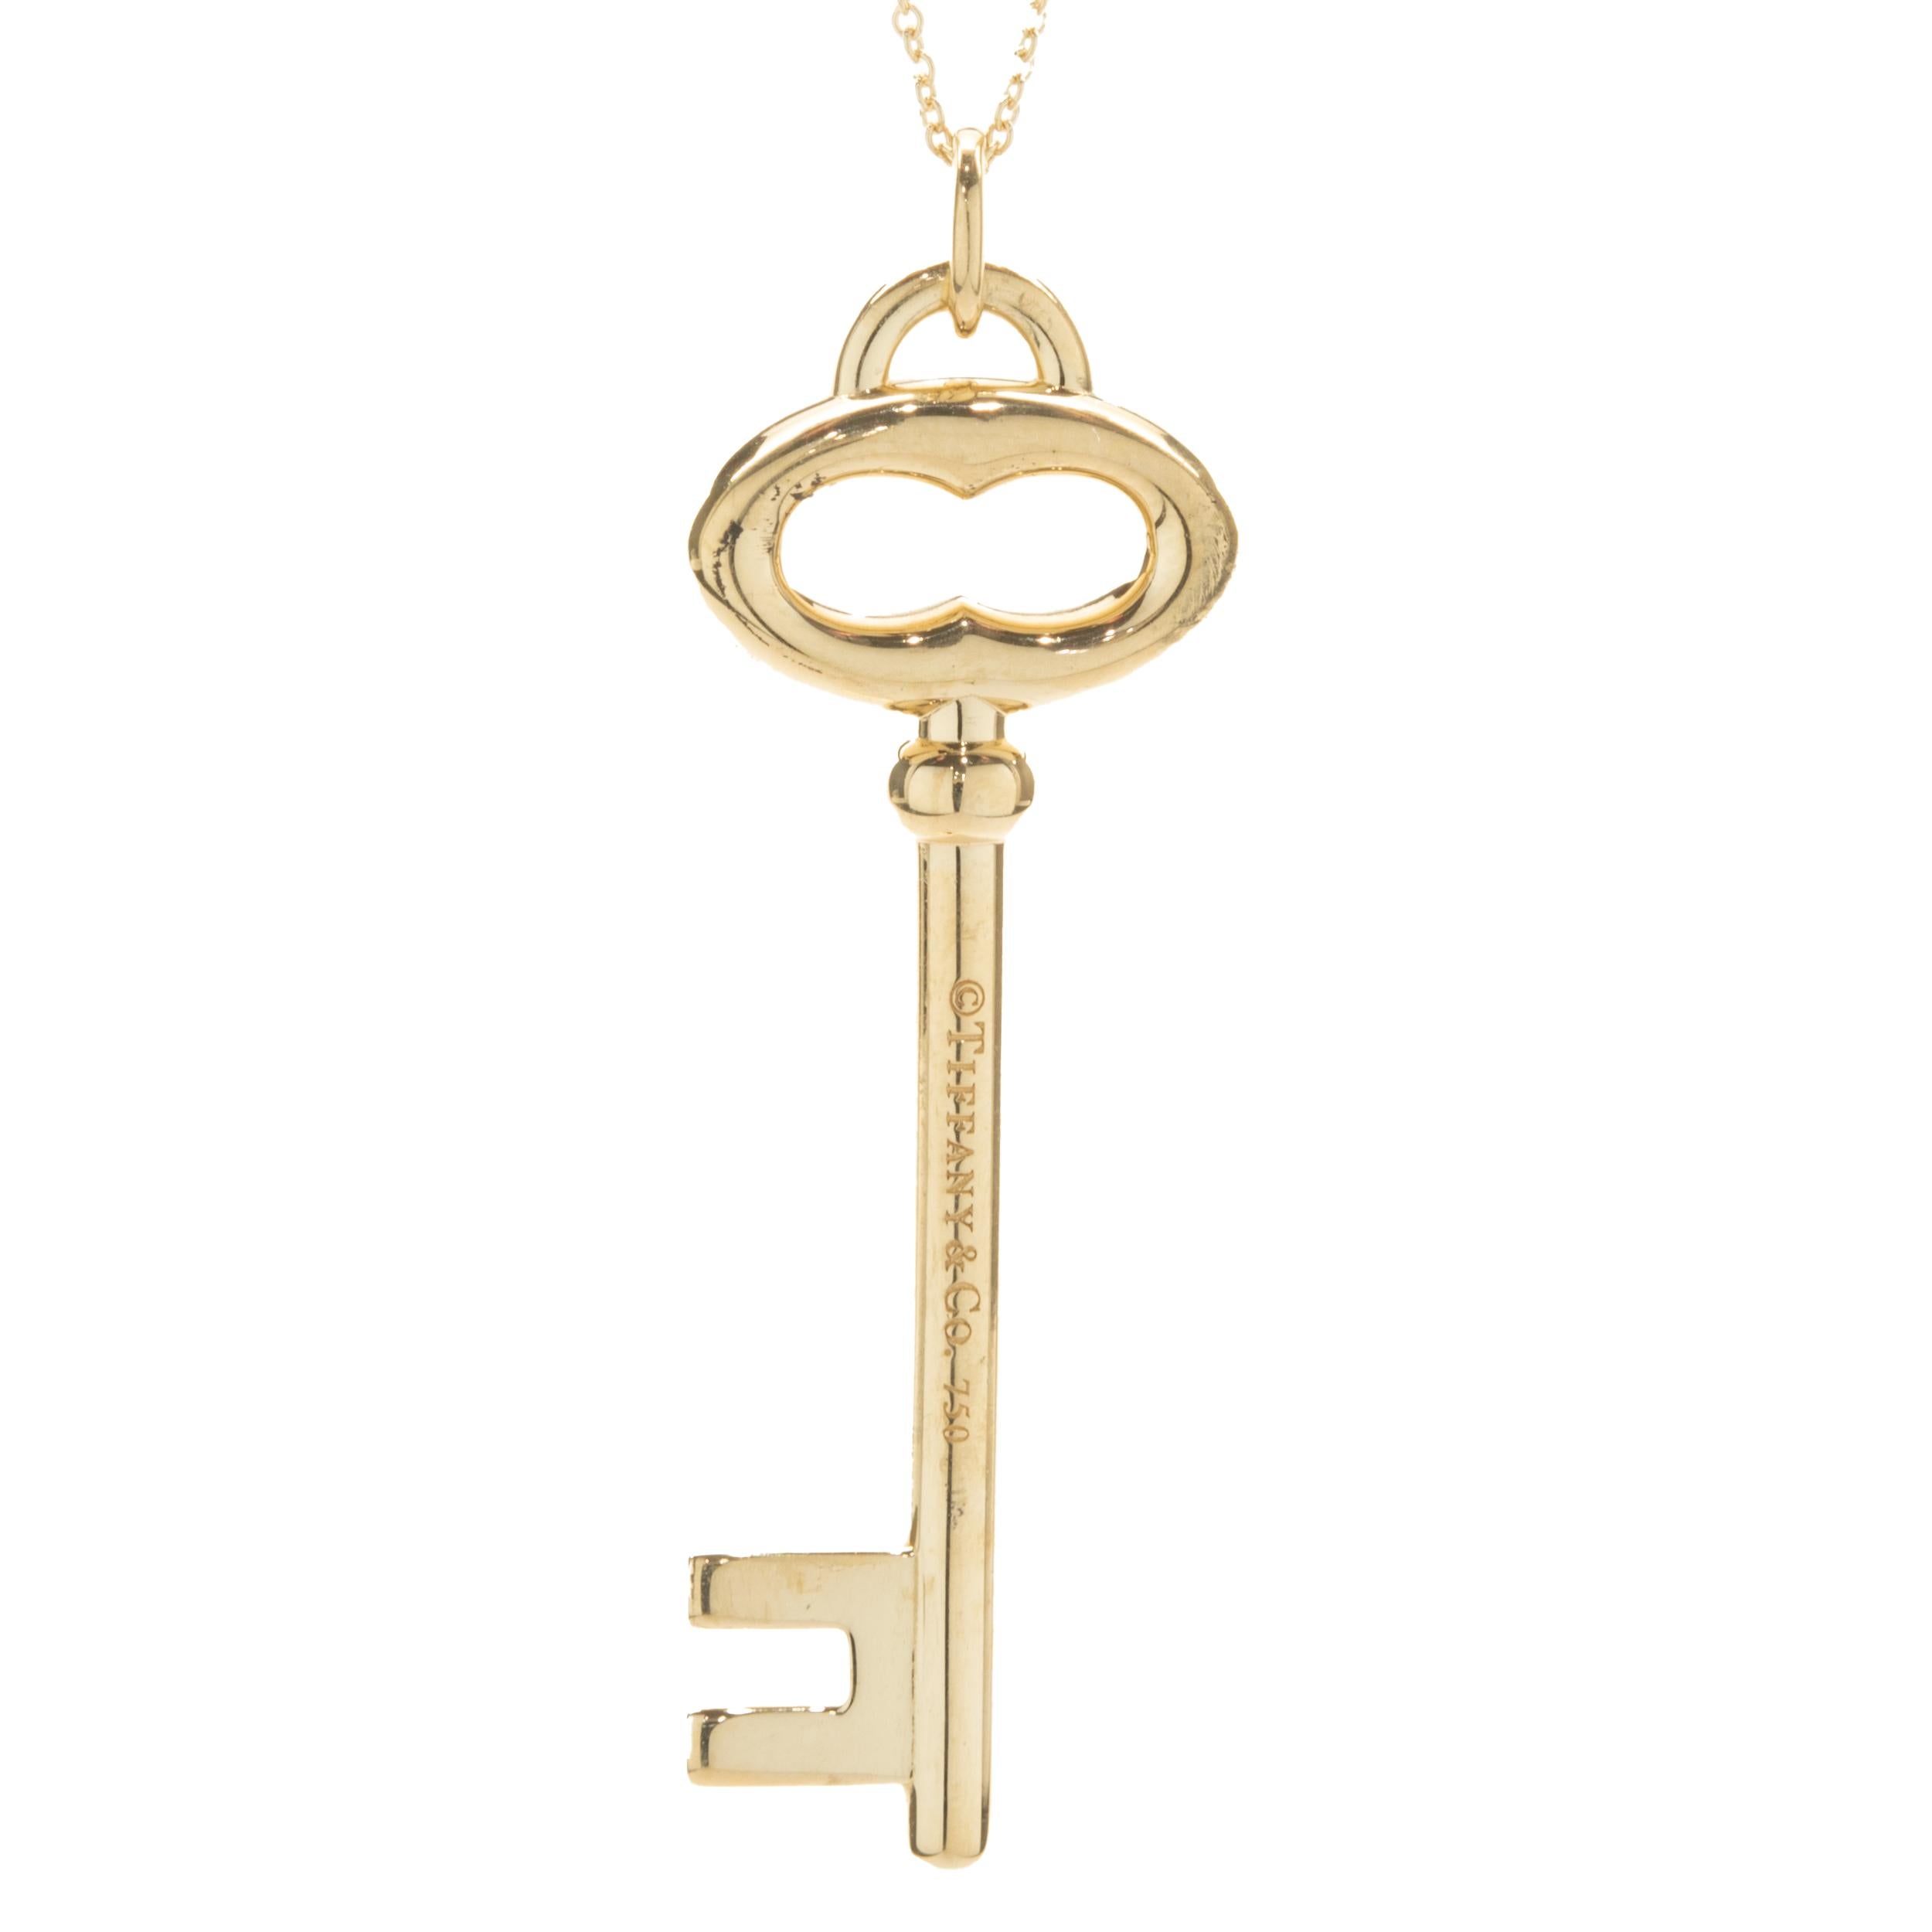 Designer: Tiffany & Co. 
Material: 18K yellow gold
Dimensions: necklace measures 22-inches in length
Weight: 16.02 grams